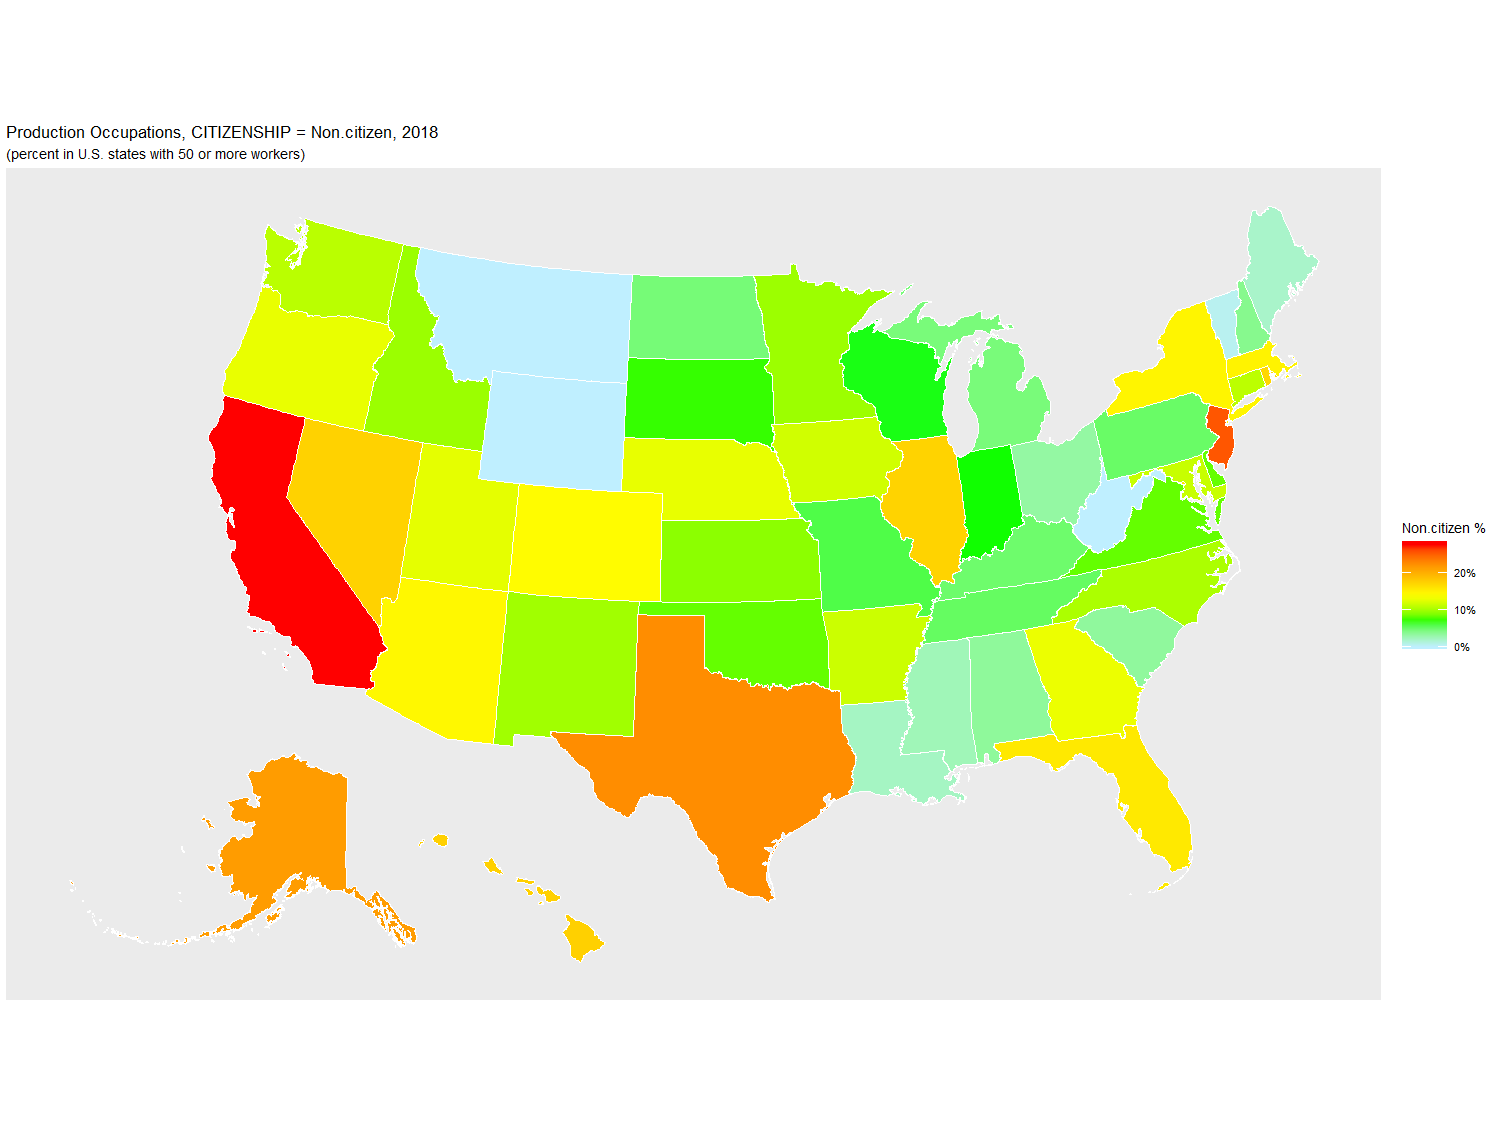 Non-citizen Percentage of Production Occupations by U.S. State, 2018